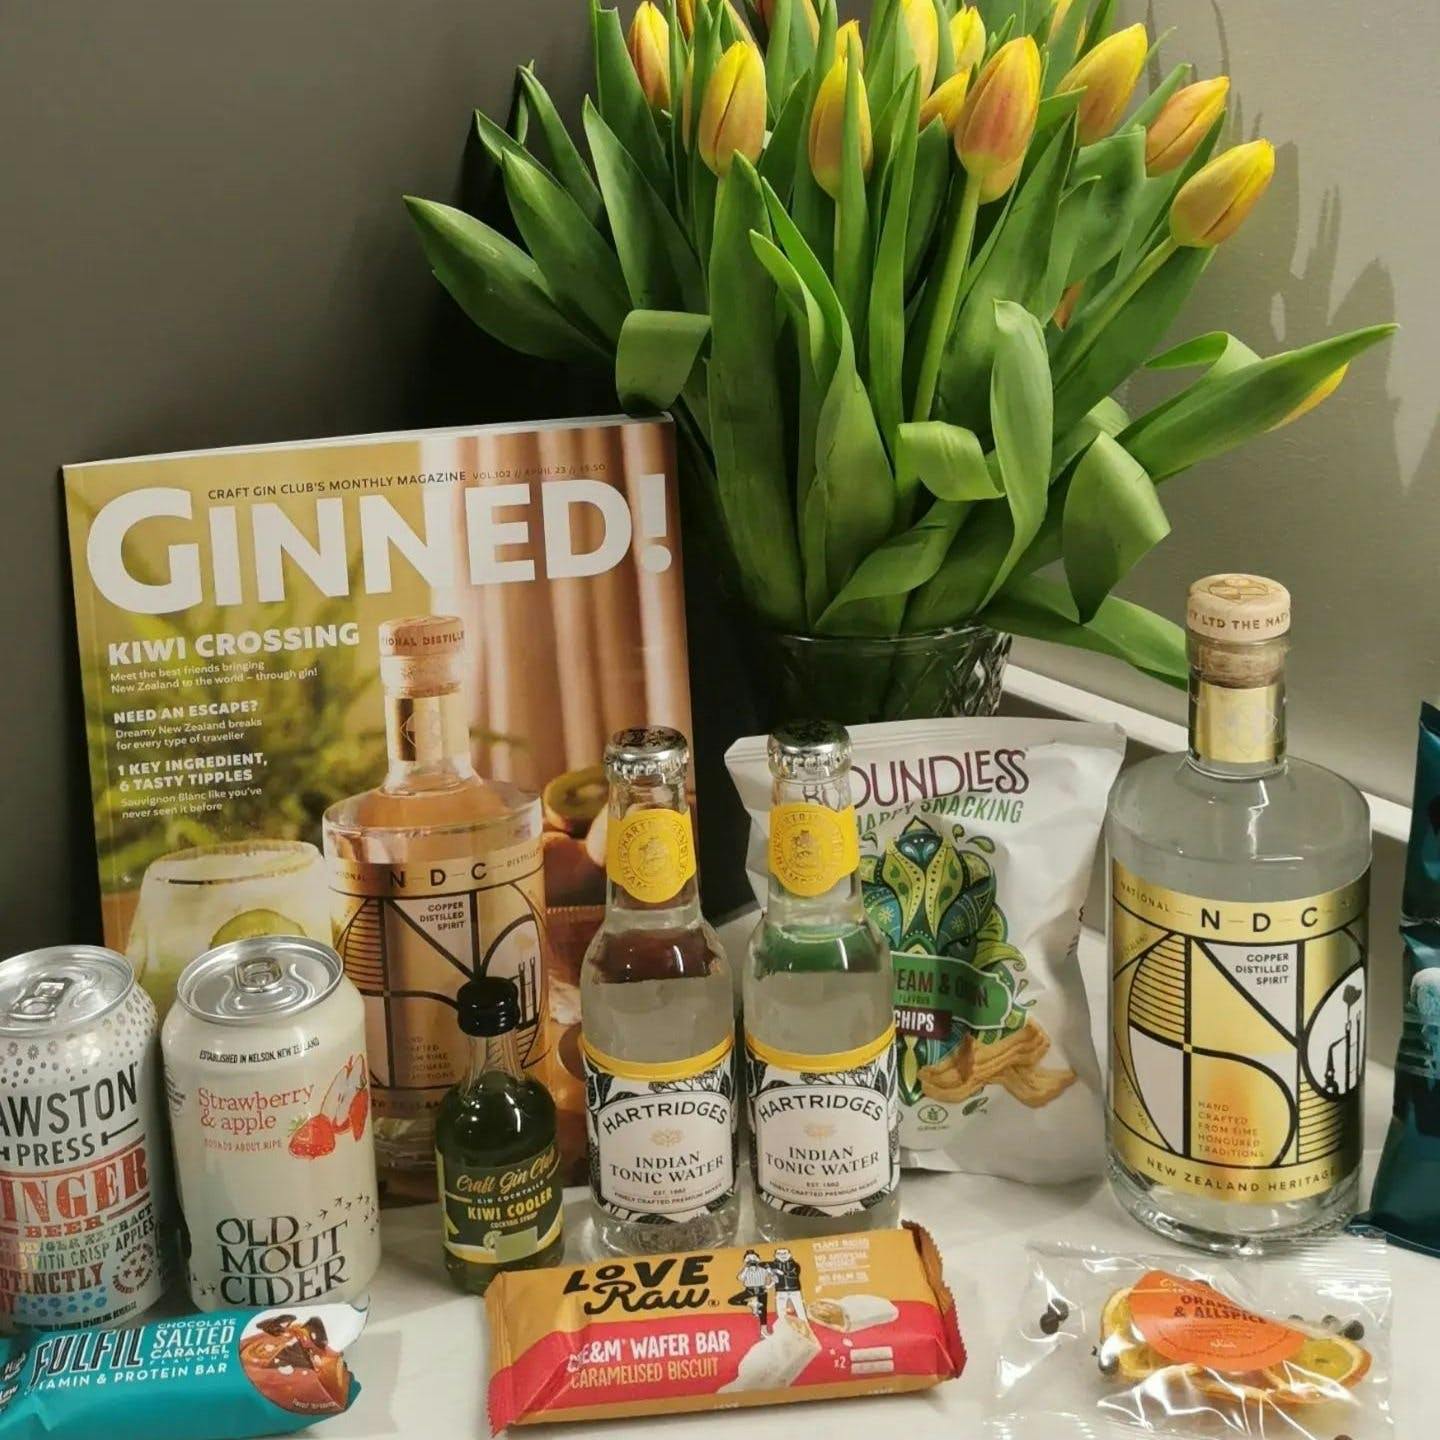 NDC Heritage Gin box contents with tulips in background